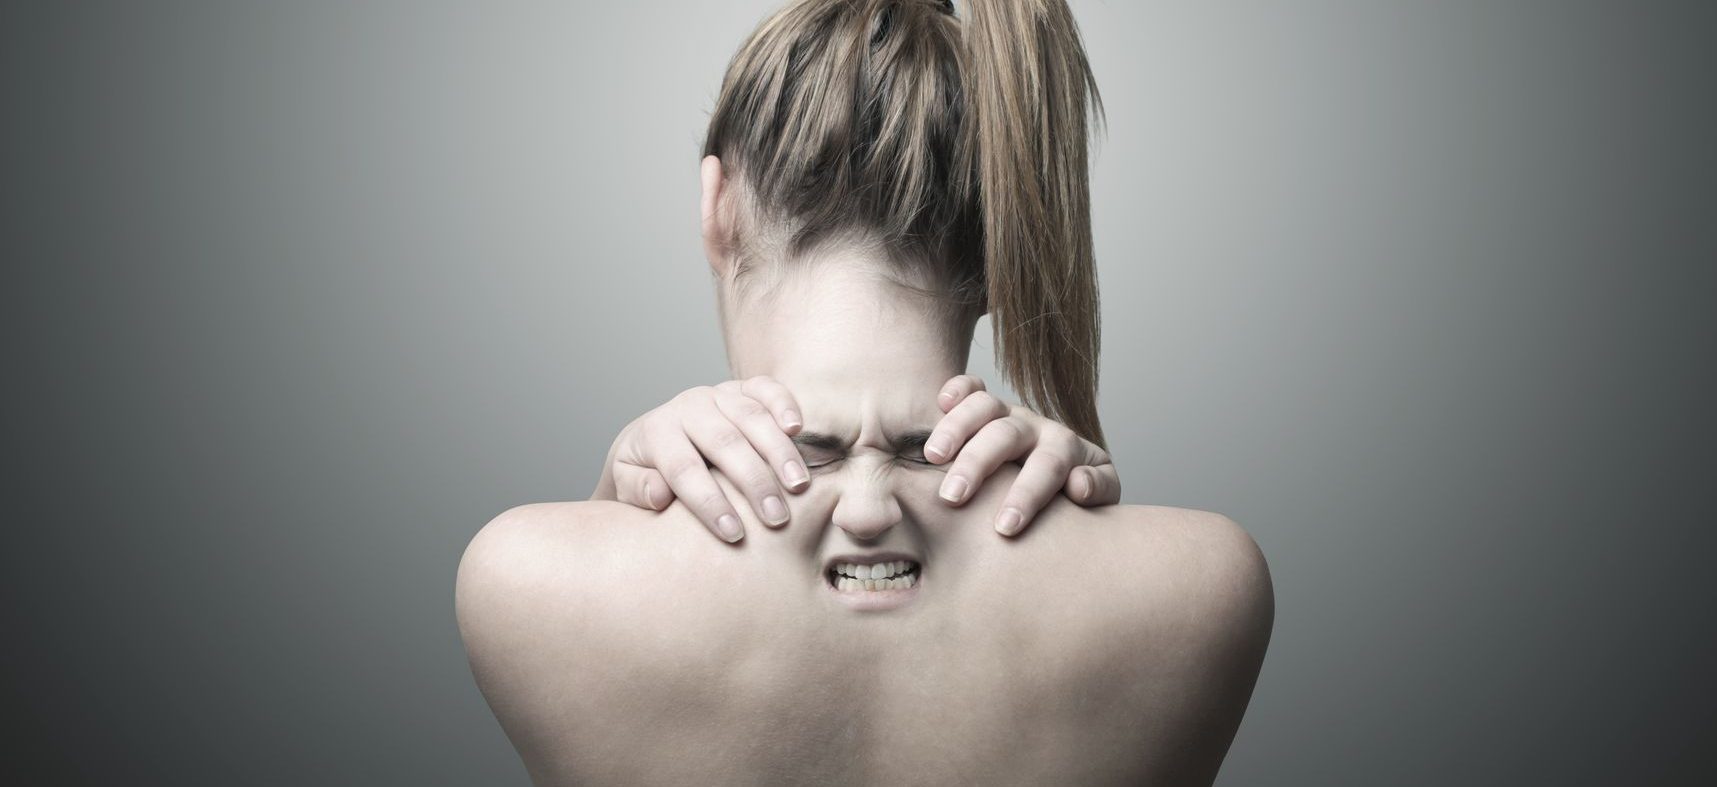 3 Painful Warning Signs You Might Have A Herniated Disc in Your Neck